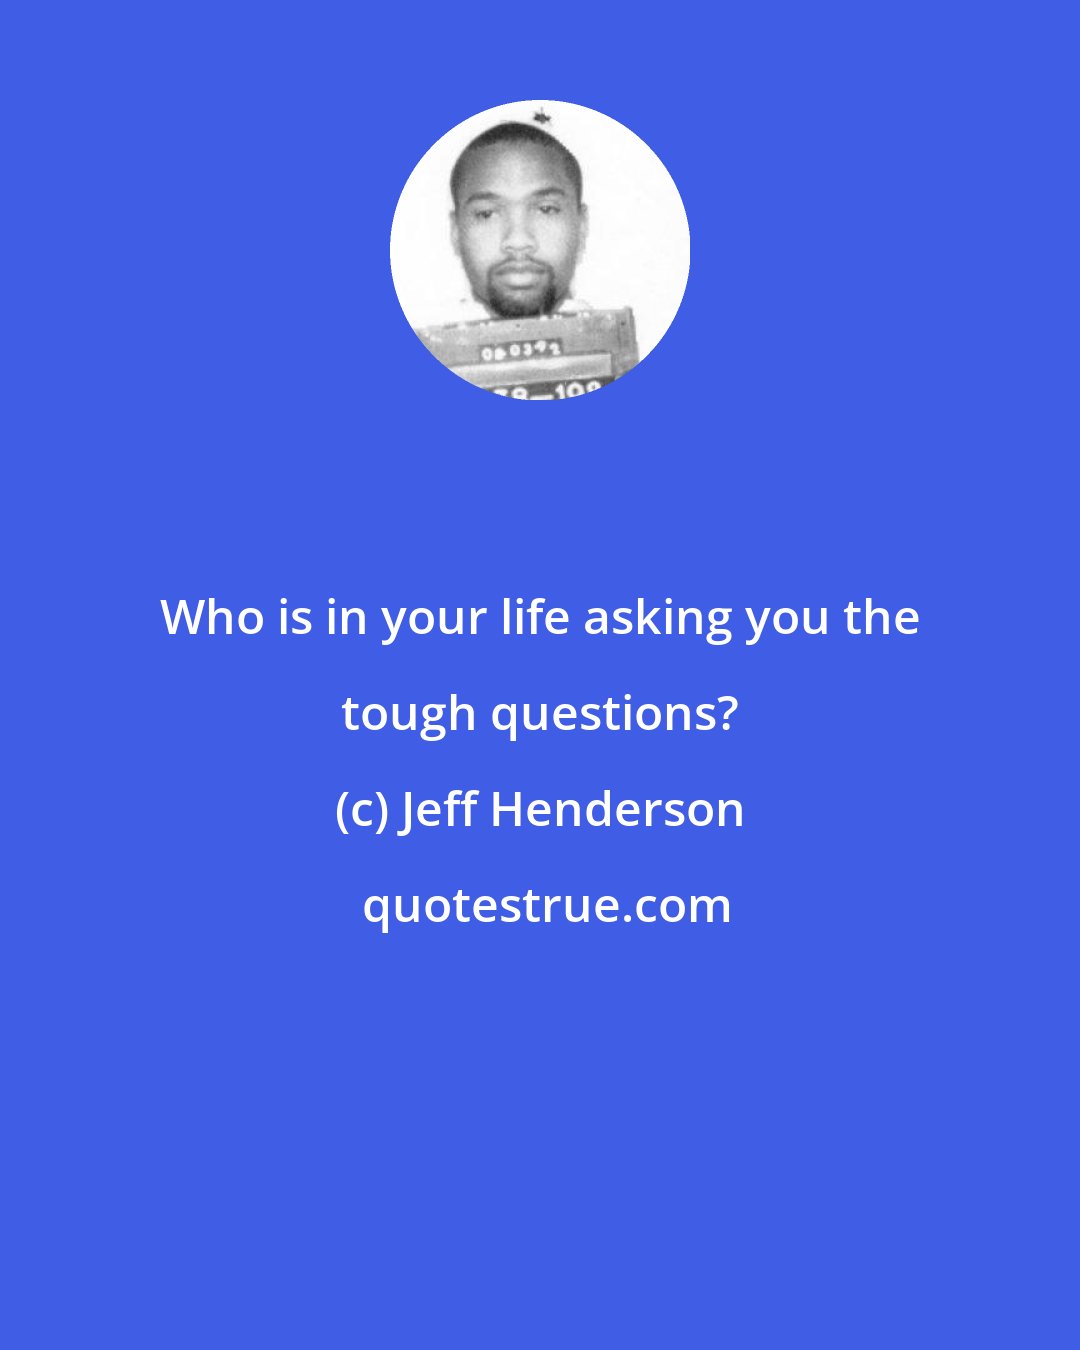 Jeff Henderson: Who is in your life asking you the tough questions?